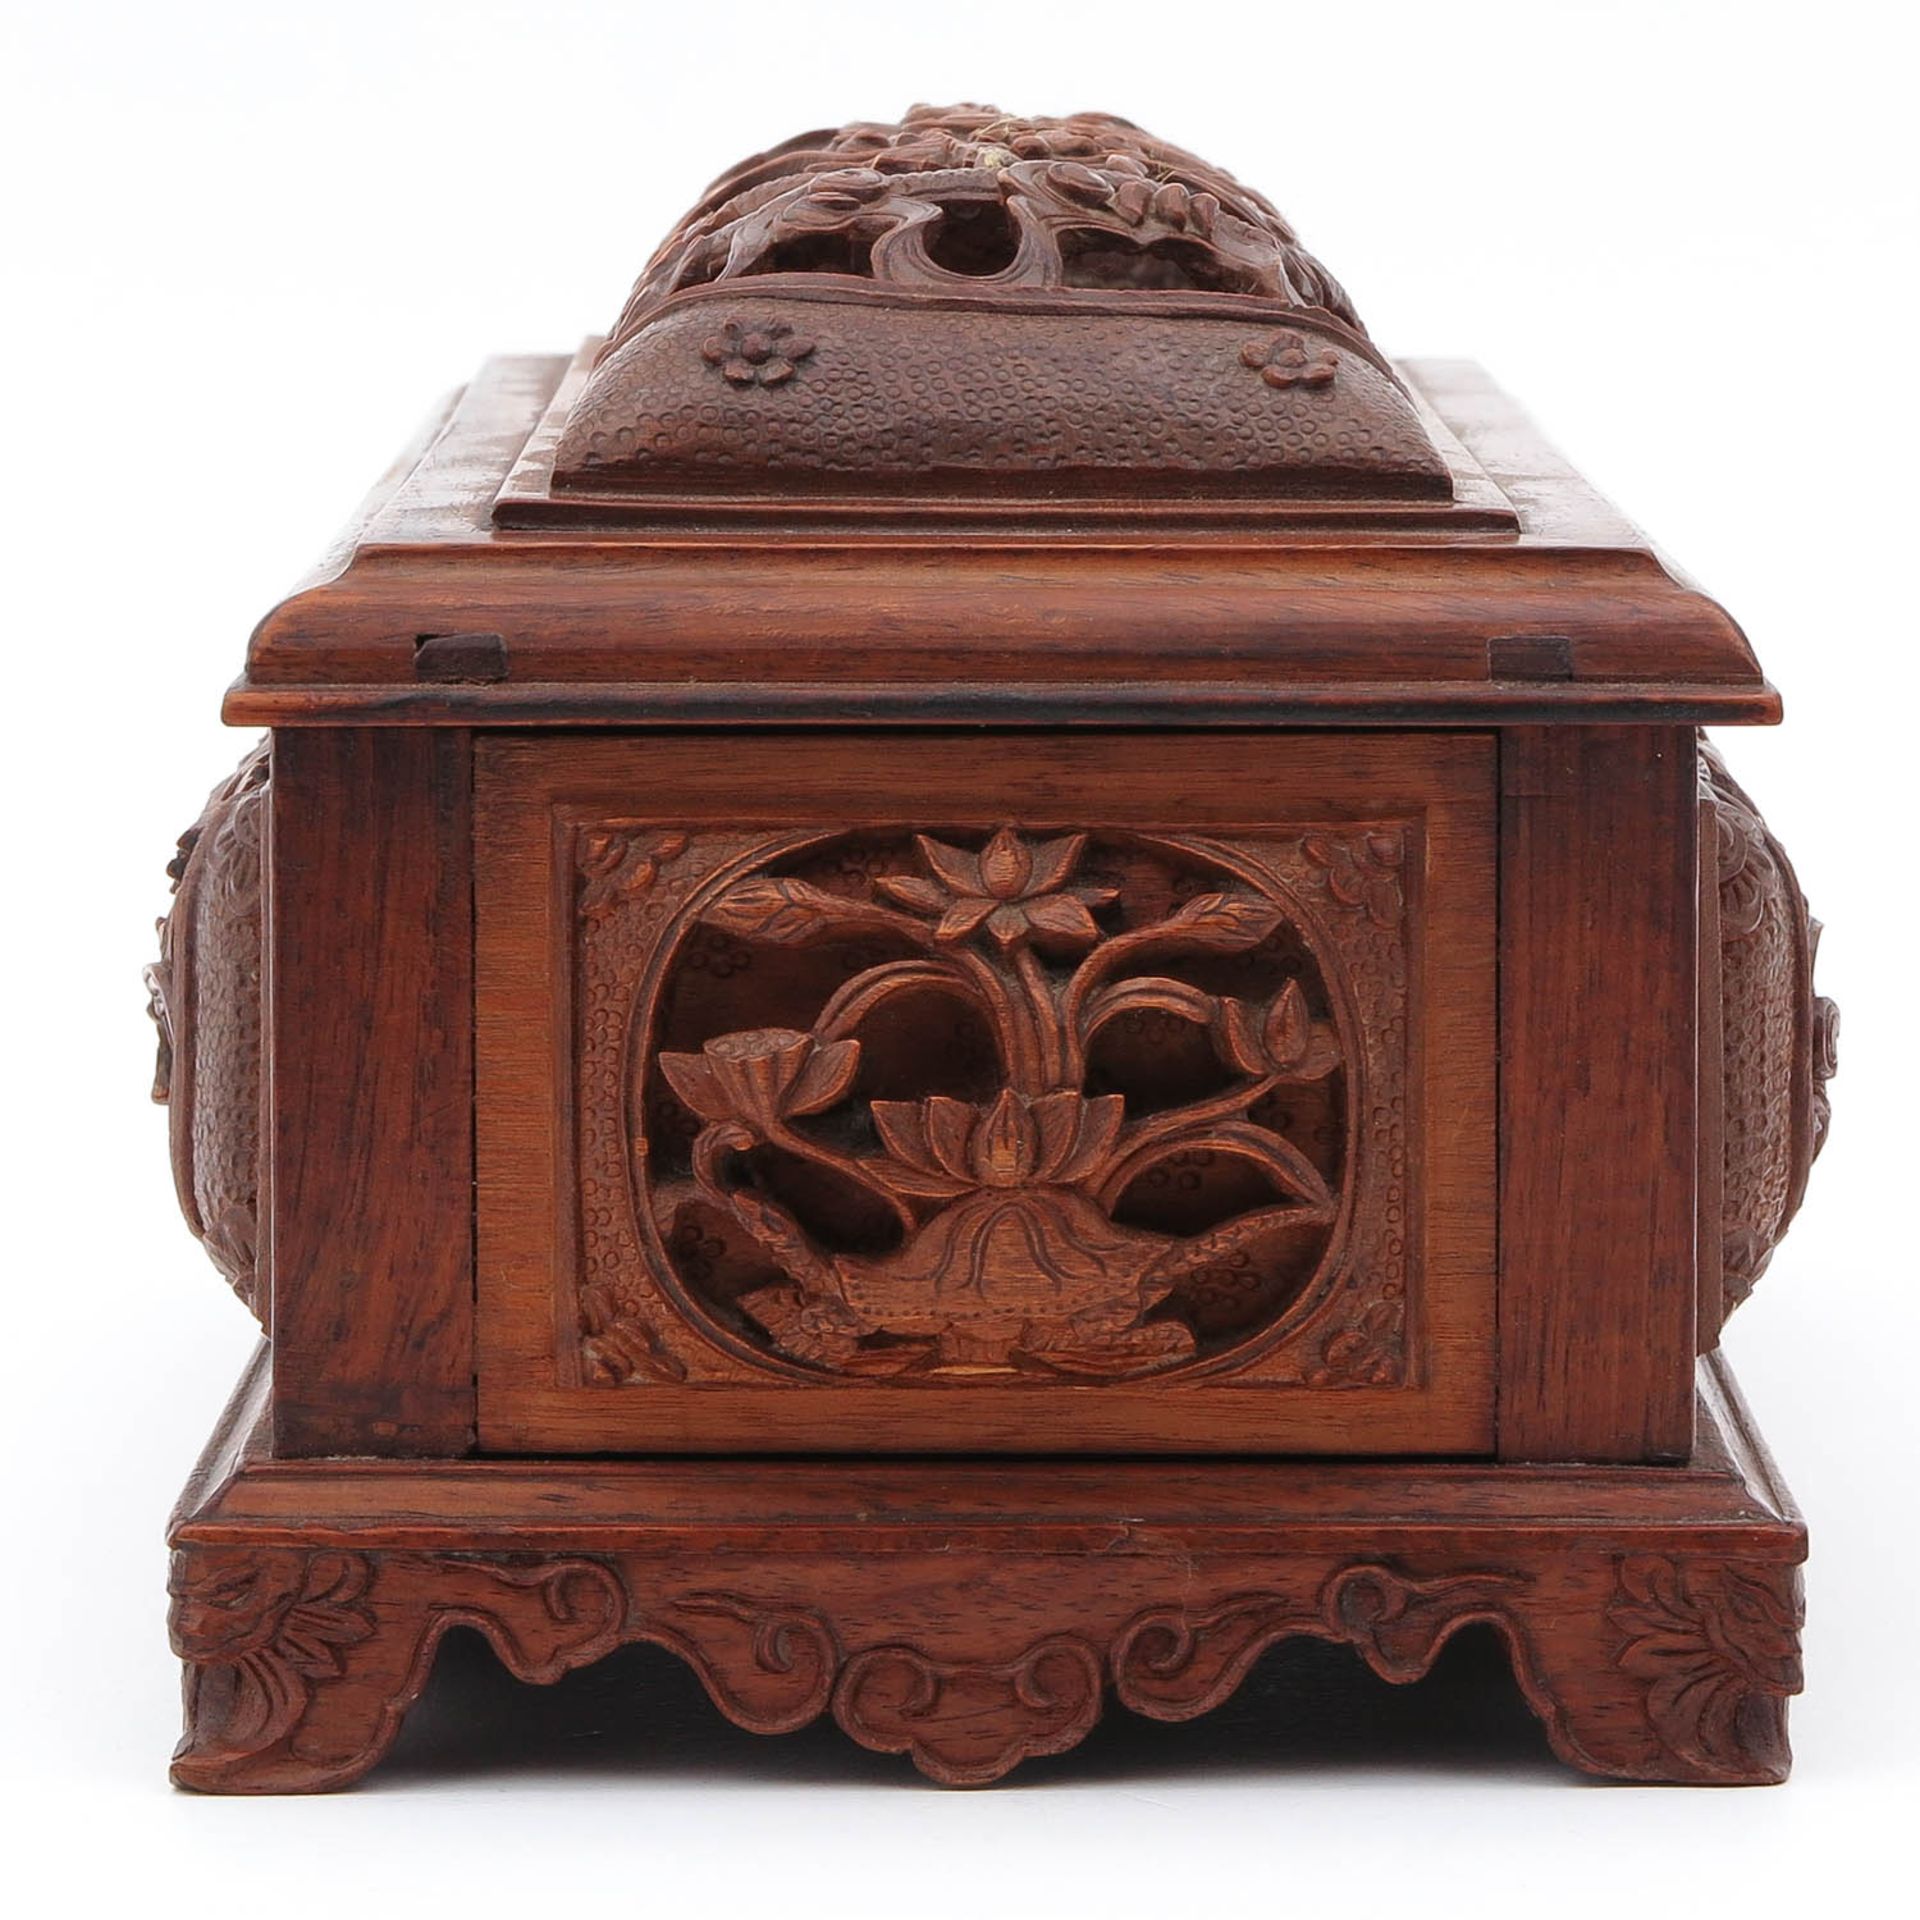 A Carved Wood Box - Image 2 of 10